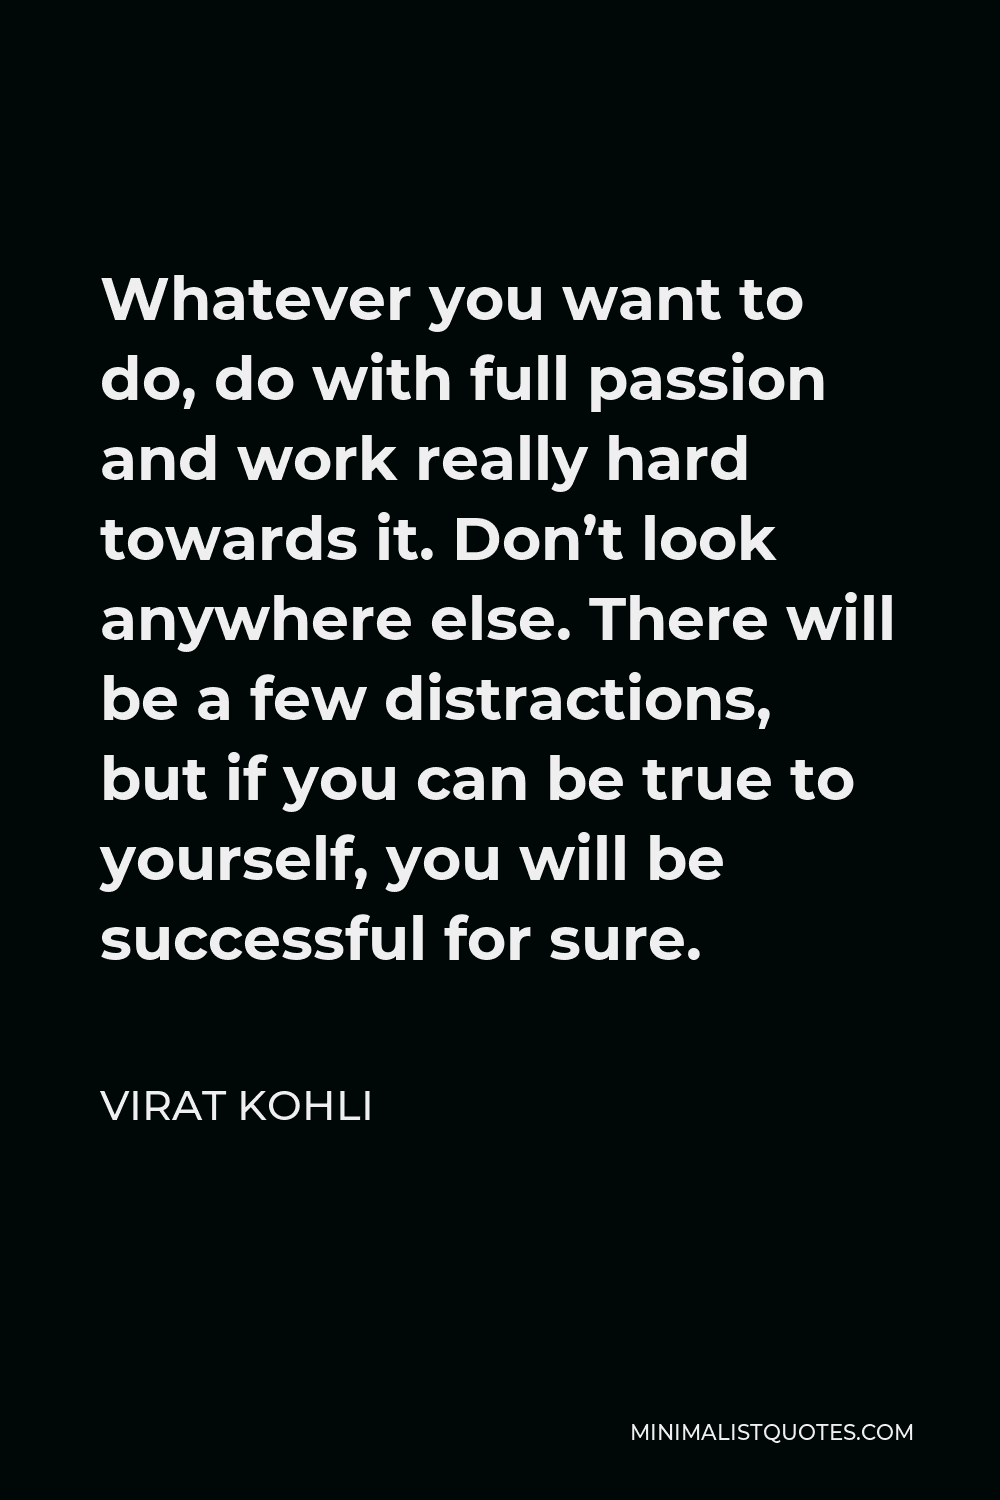 Virat Kohli Quote - Whatever you want to do, do with full passion and work really hard towards it. Don’t look anywhere else. There will be a few distractions, but if you can be true to yourself, you will be successful for sure.